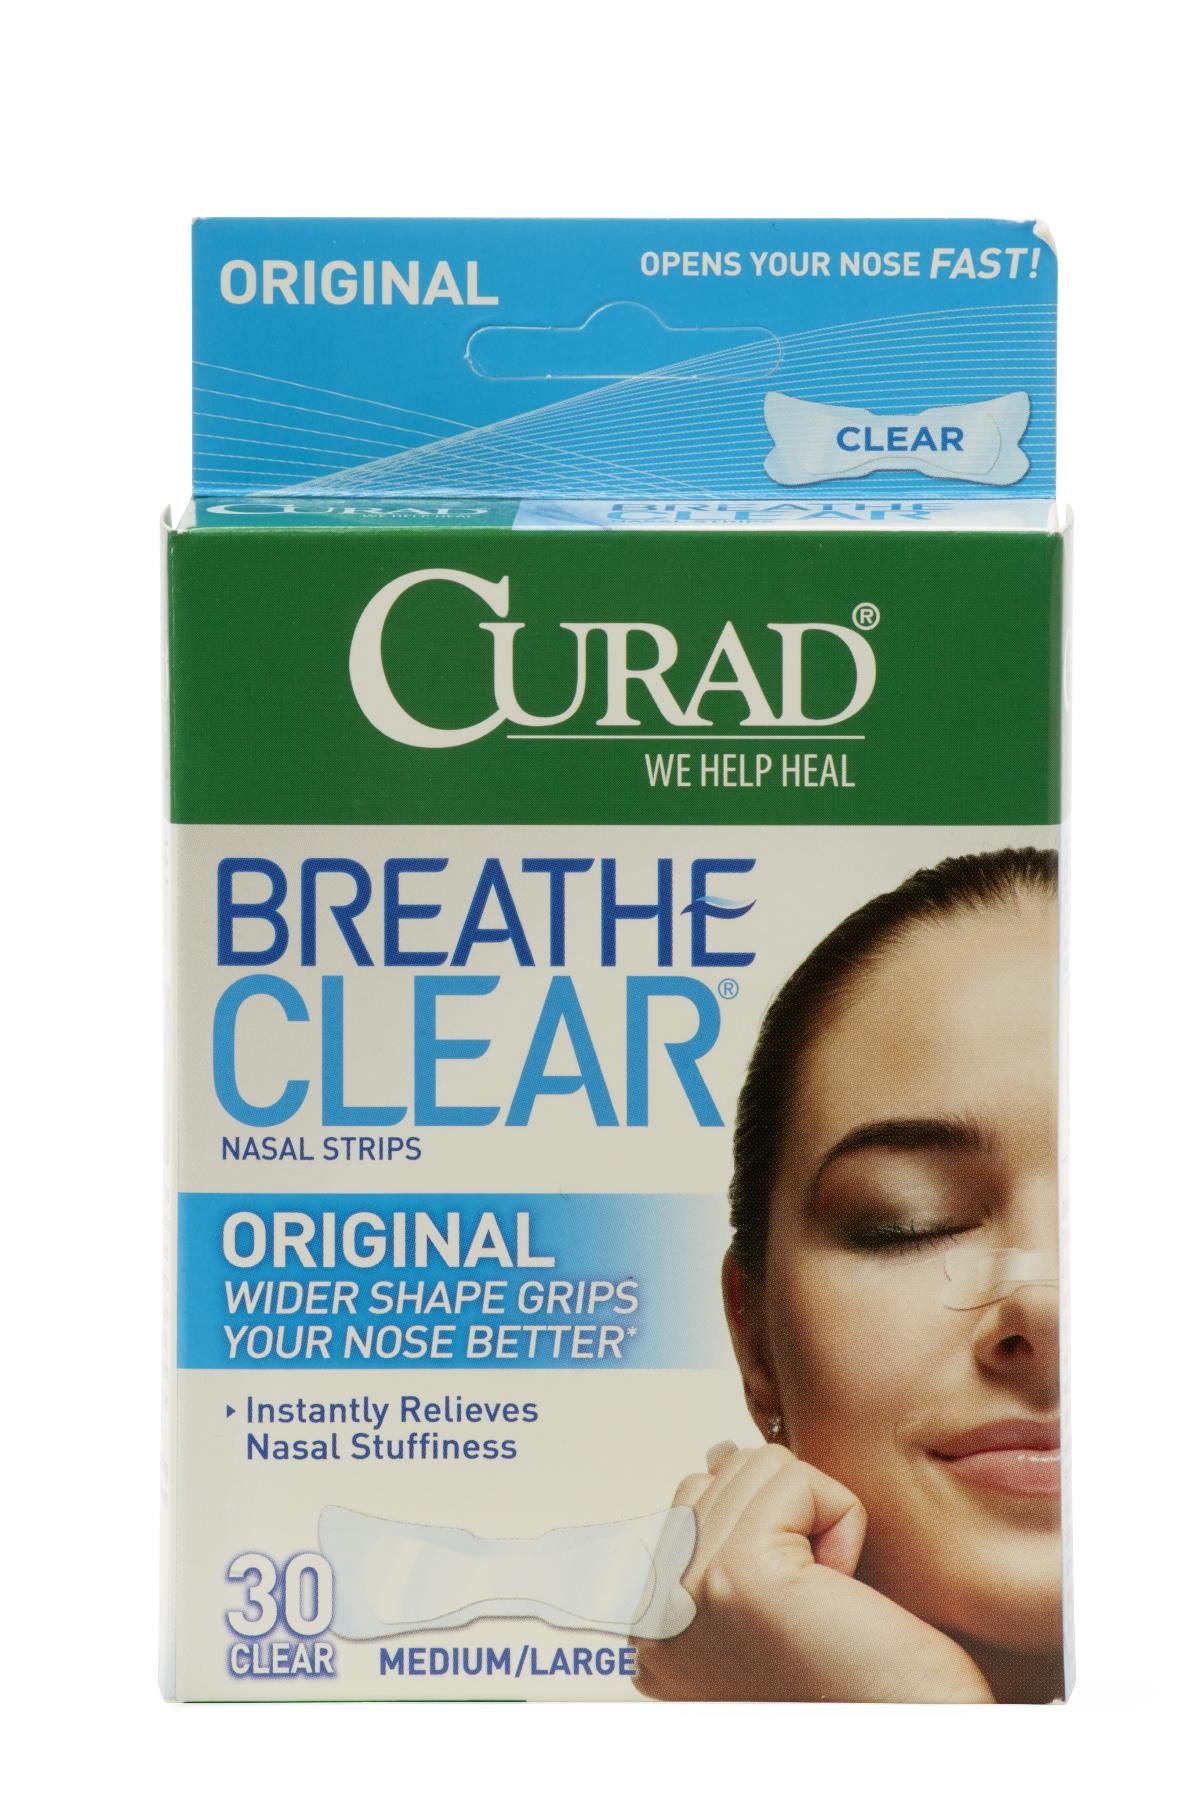 CURAD Breathe Clear Nasal Strips,Clear,Medium/Large Case of 18